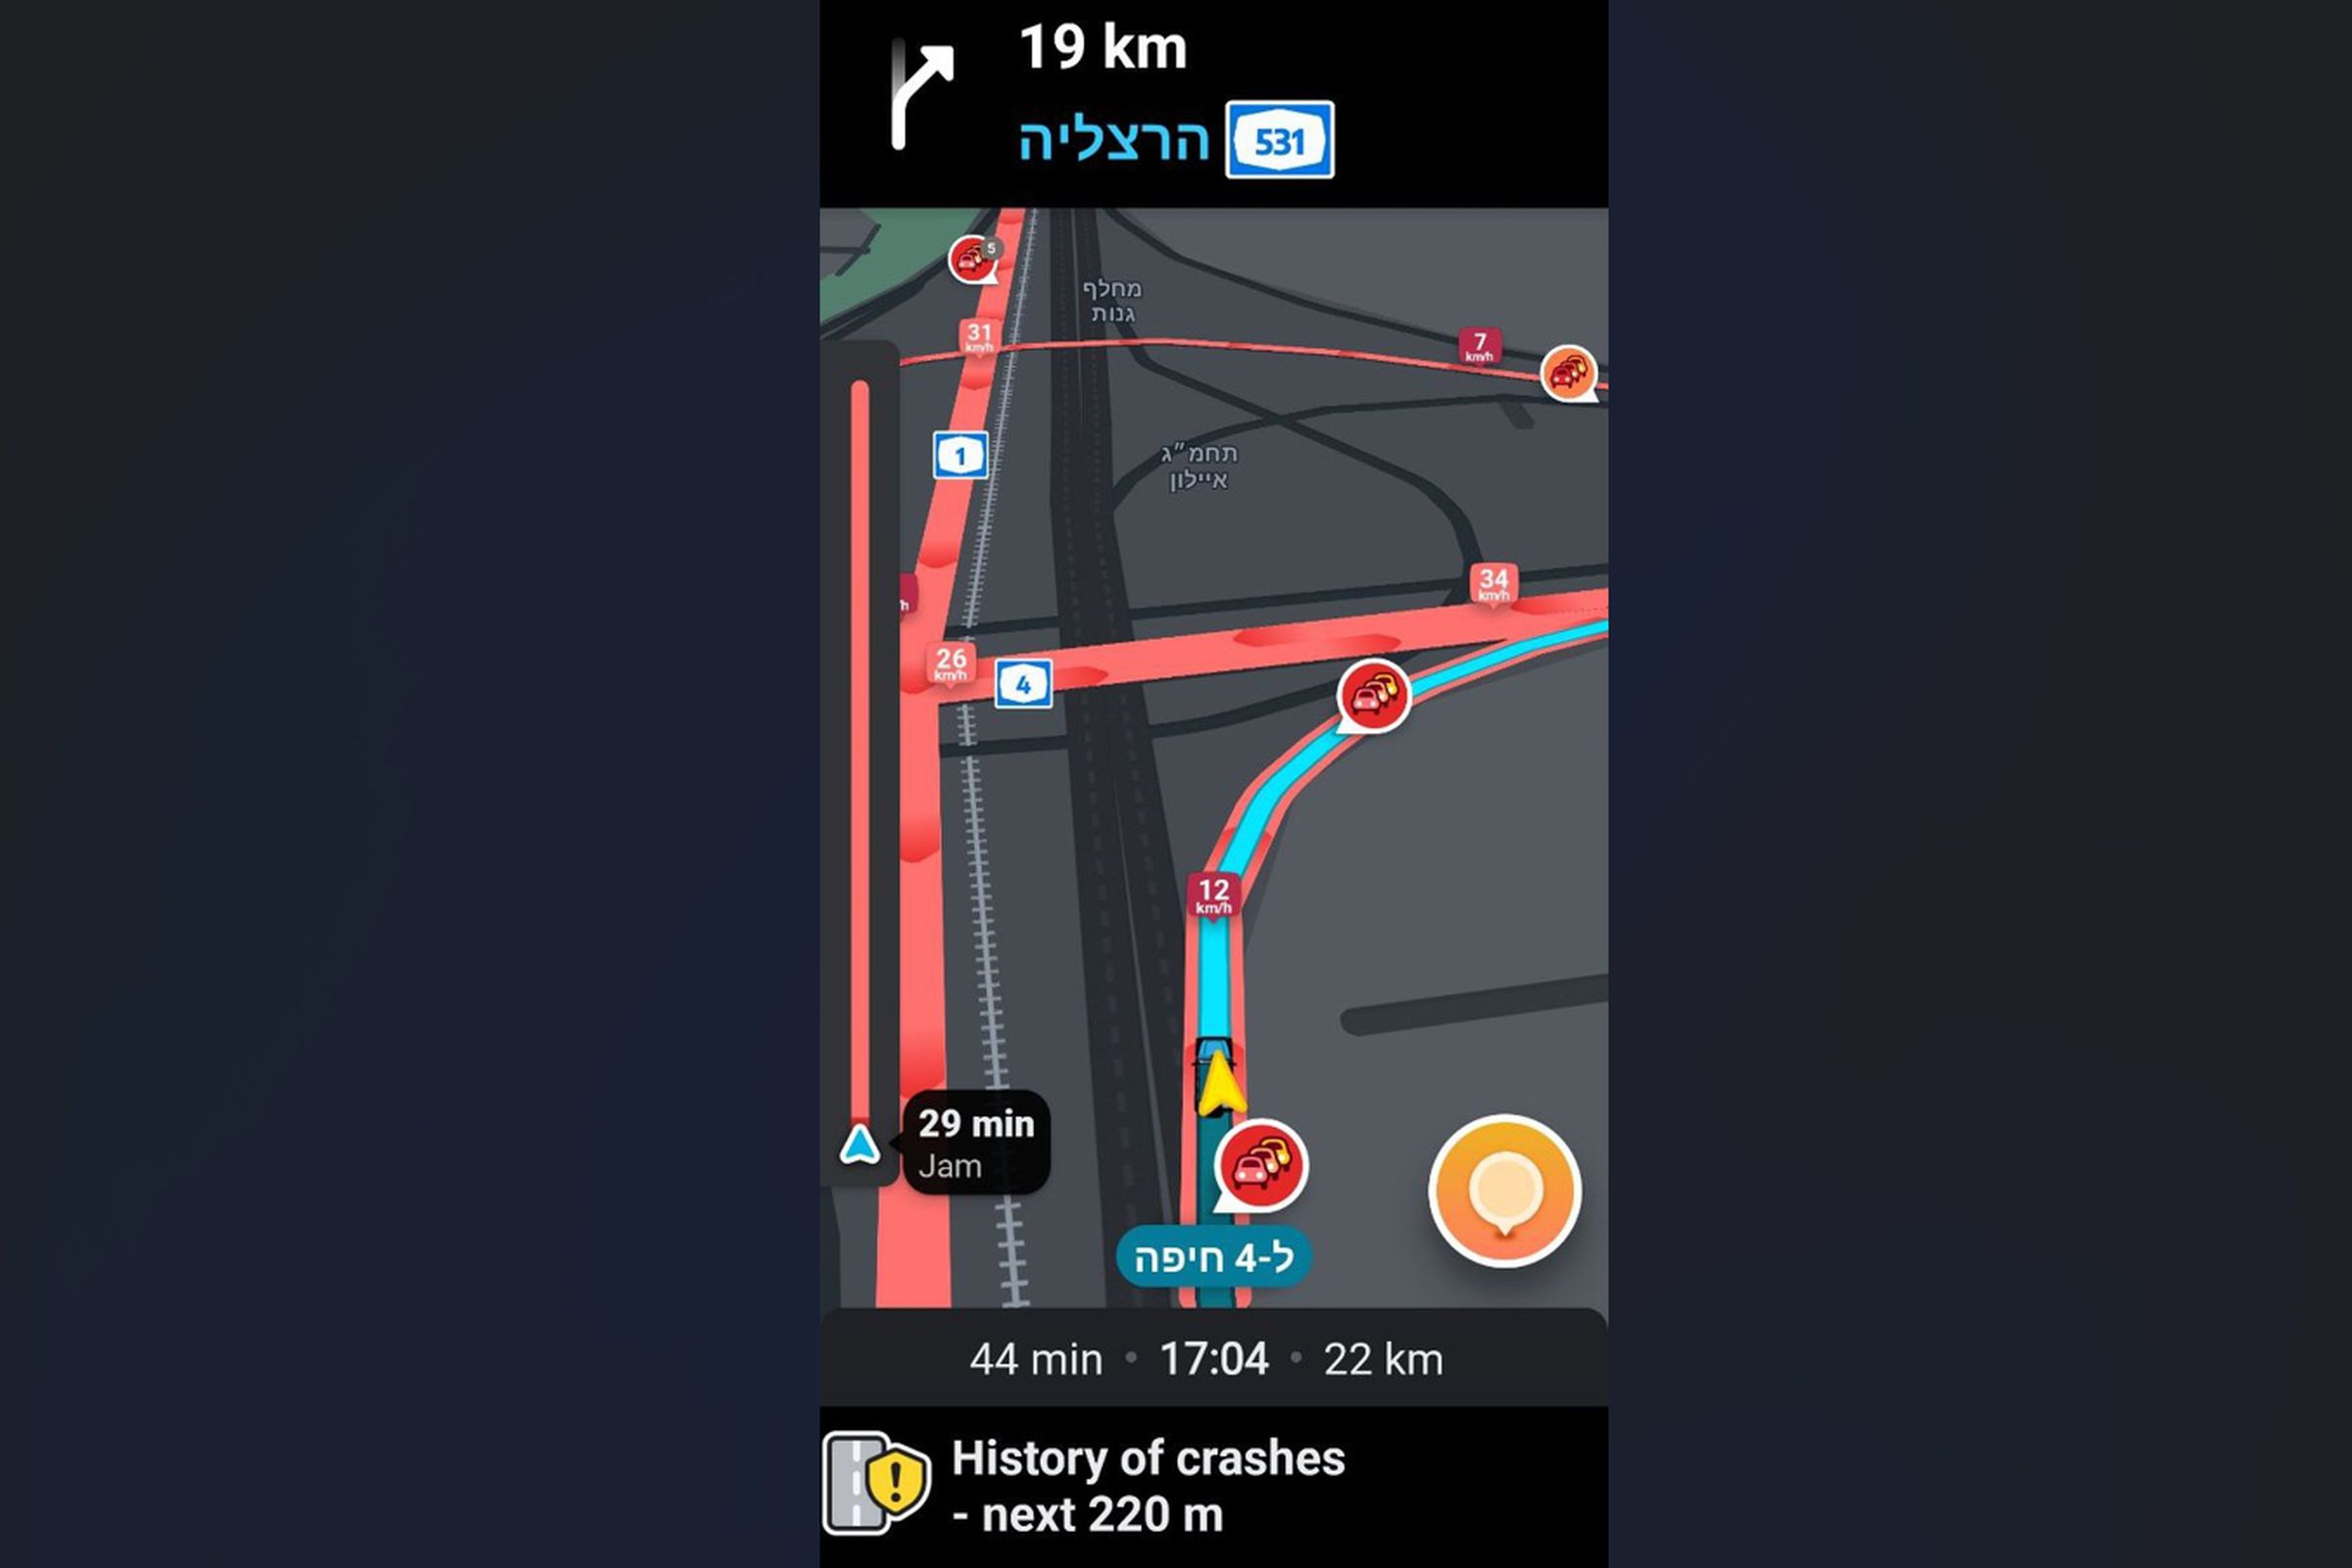 This is a screenshot of the Waze app while navigating a highway exit in Israel, showing the roads as red due to a history of crashes.